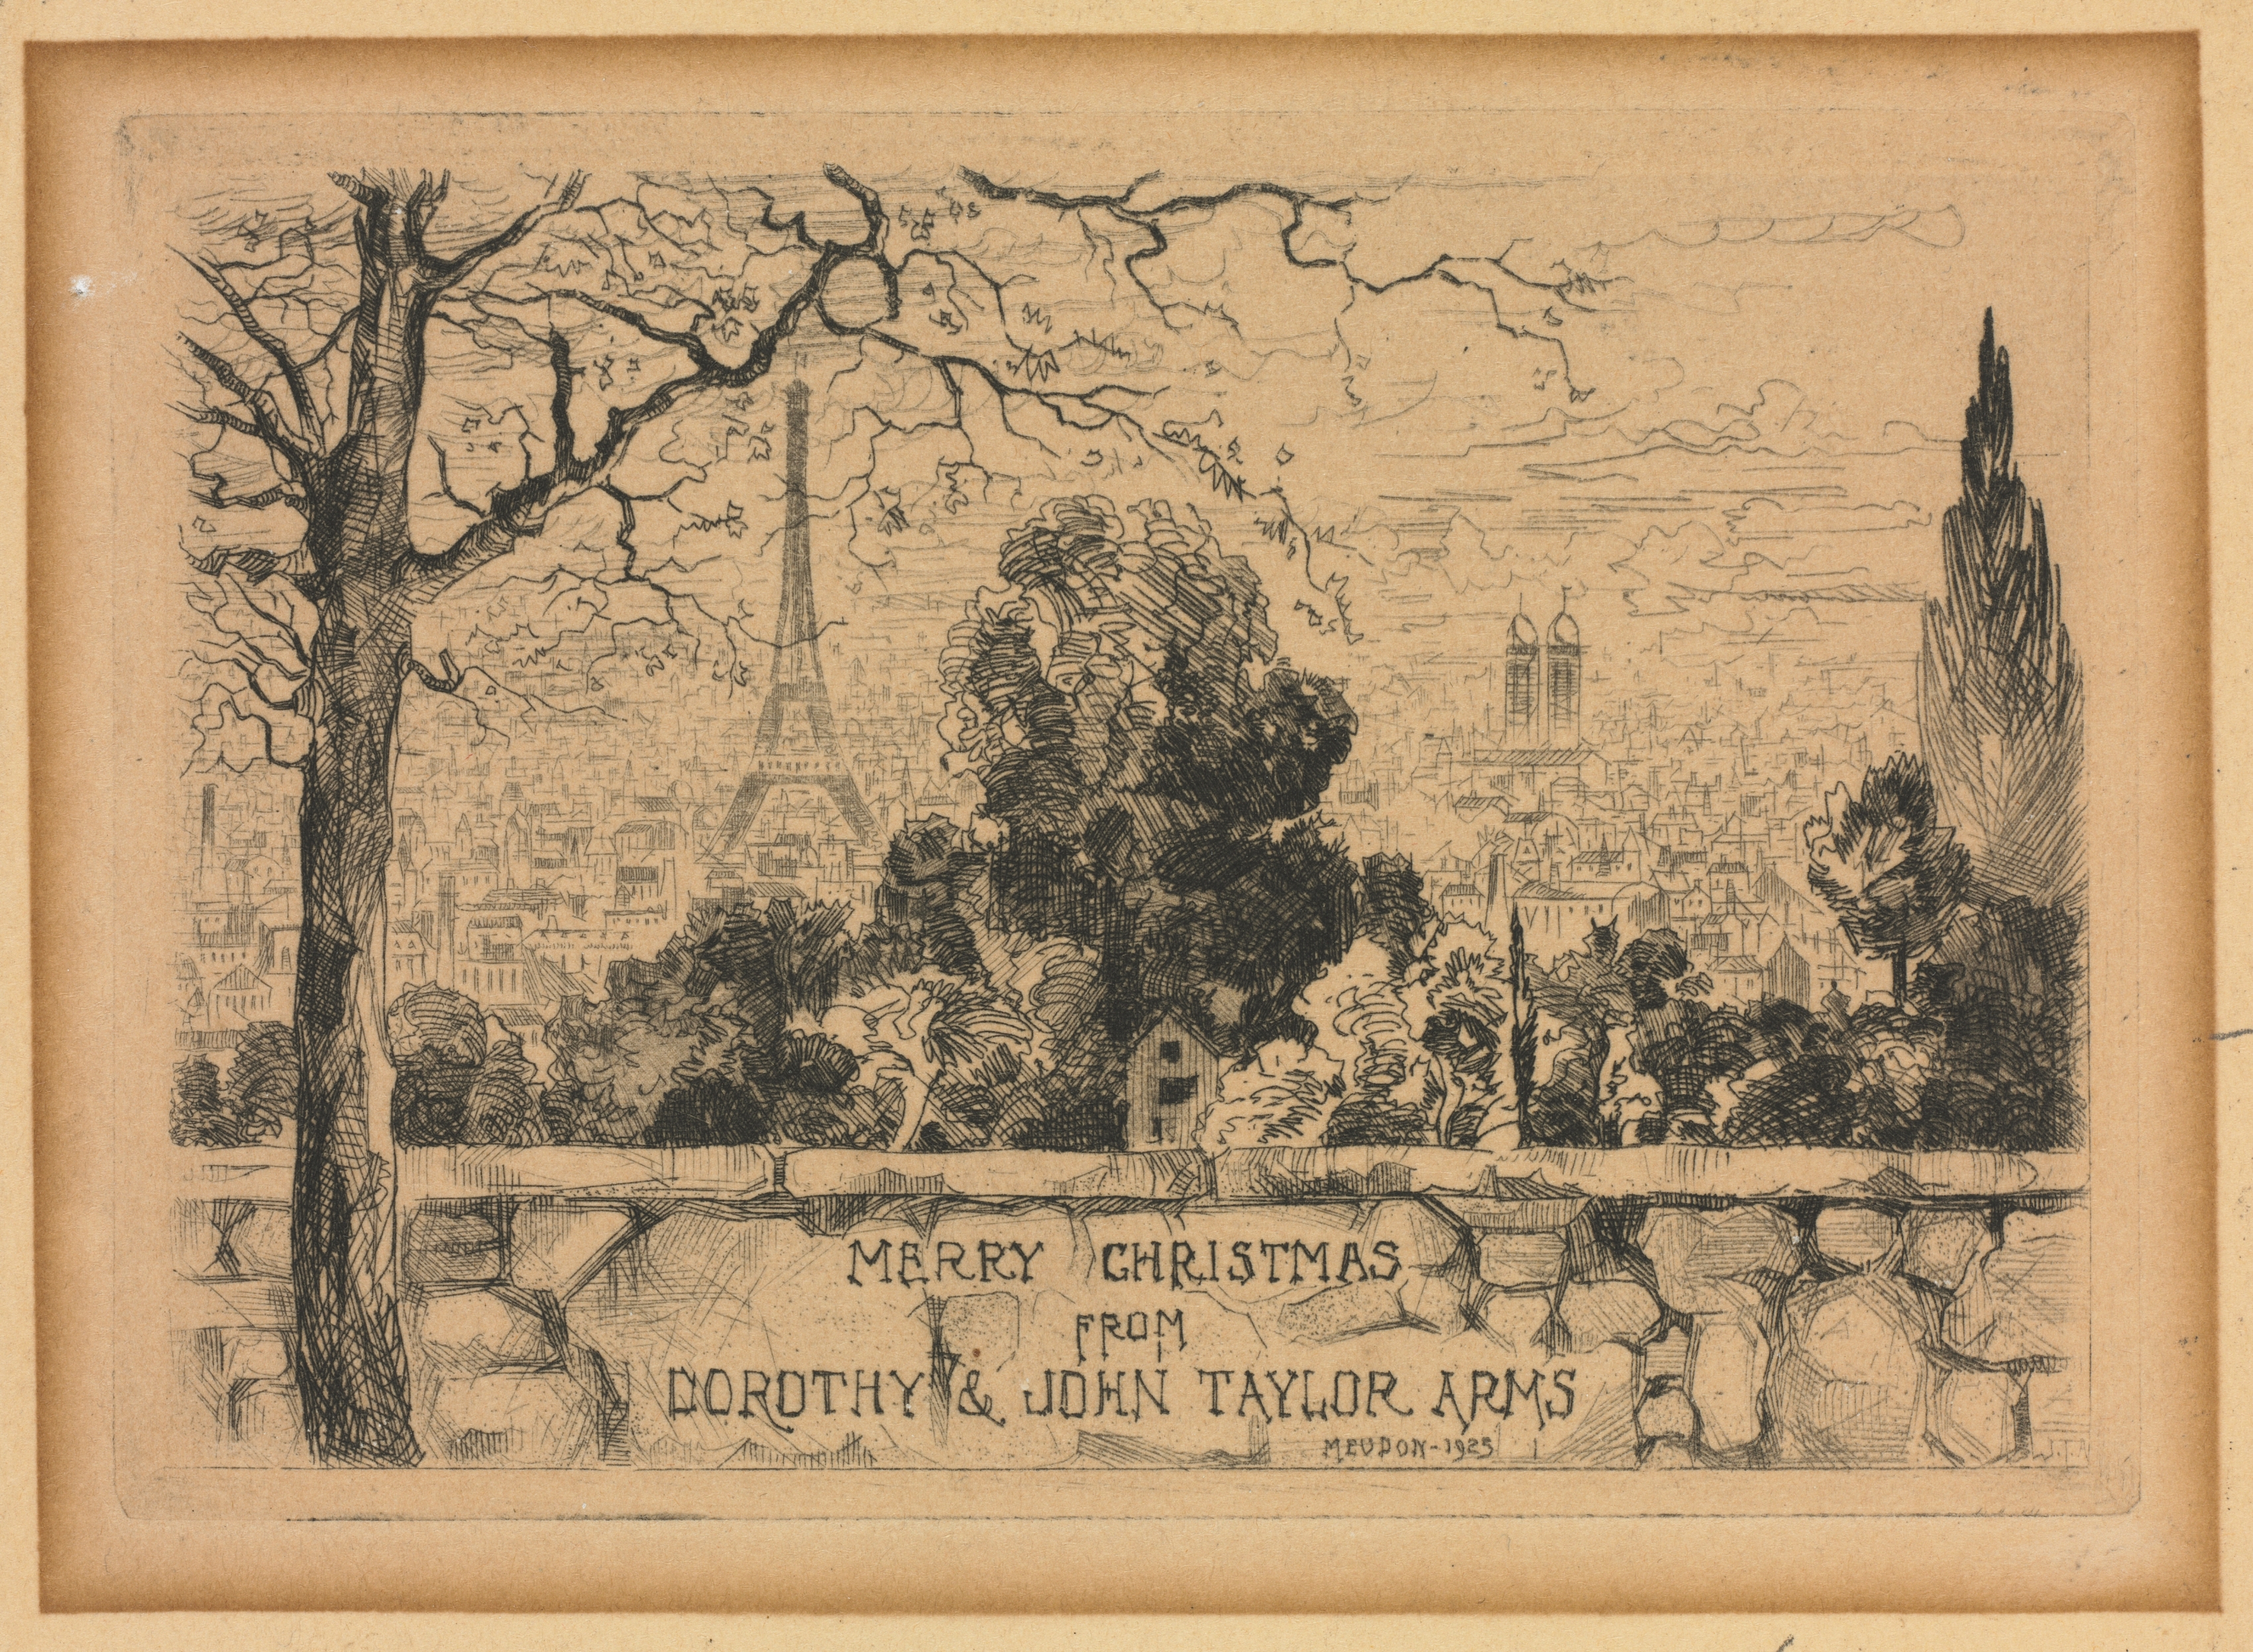 Christmas Card Series No. 8: Merry Christmas from Dorothy and John Taylor Arms